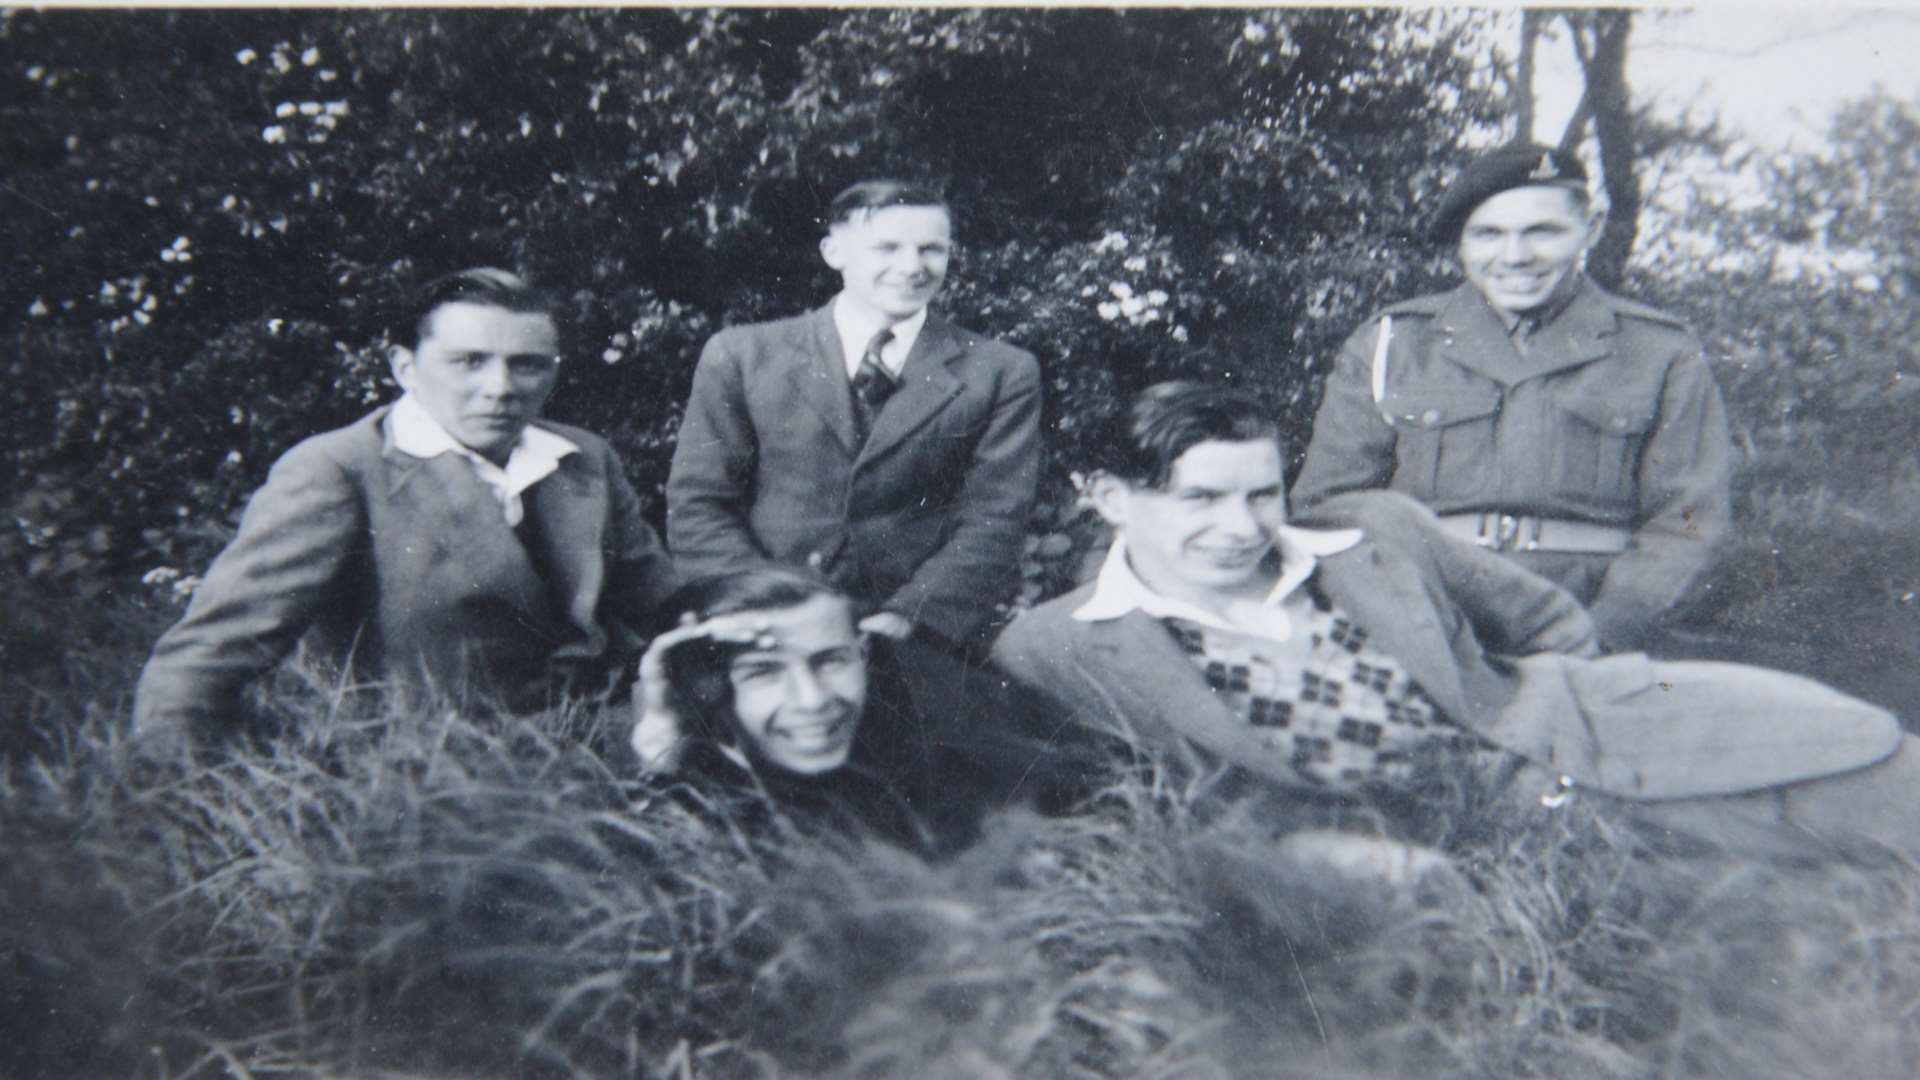 Bernard Crowhurst (lying down front ) with his friends in Darenth Woods, 1950.